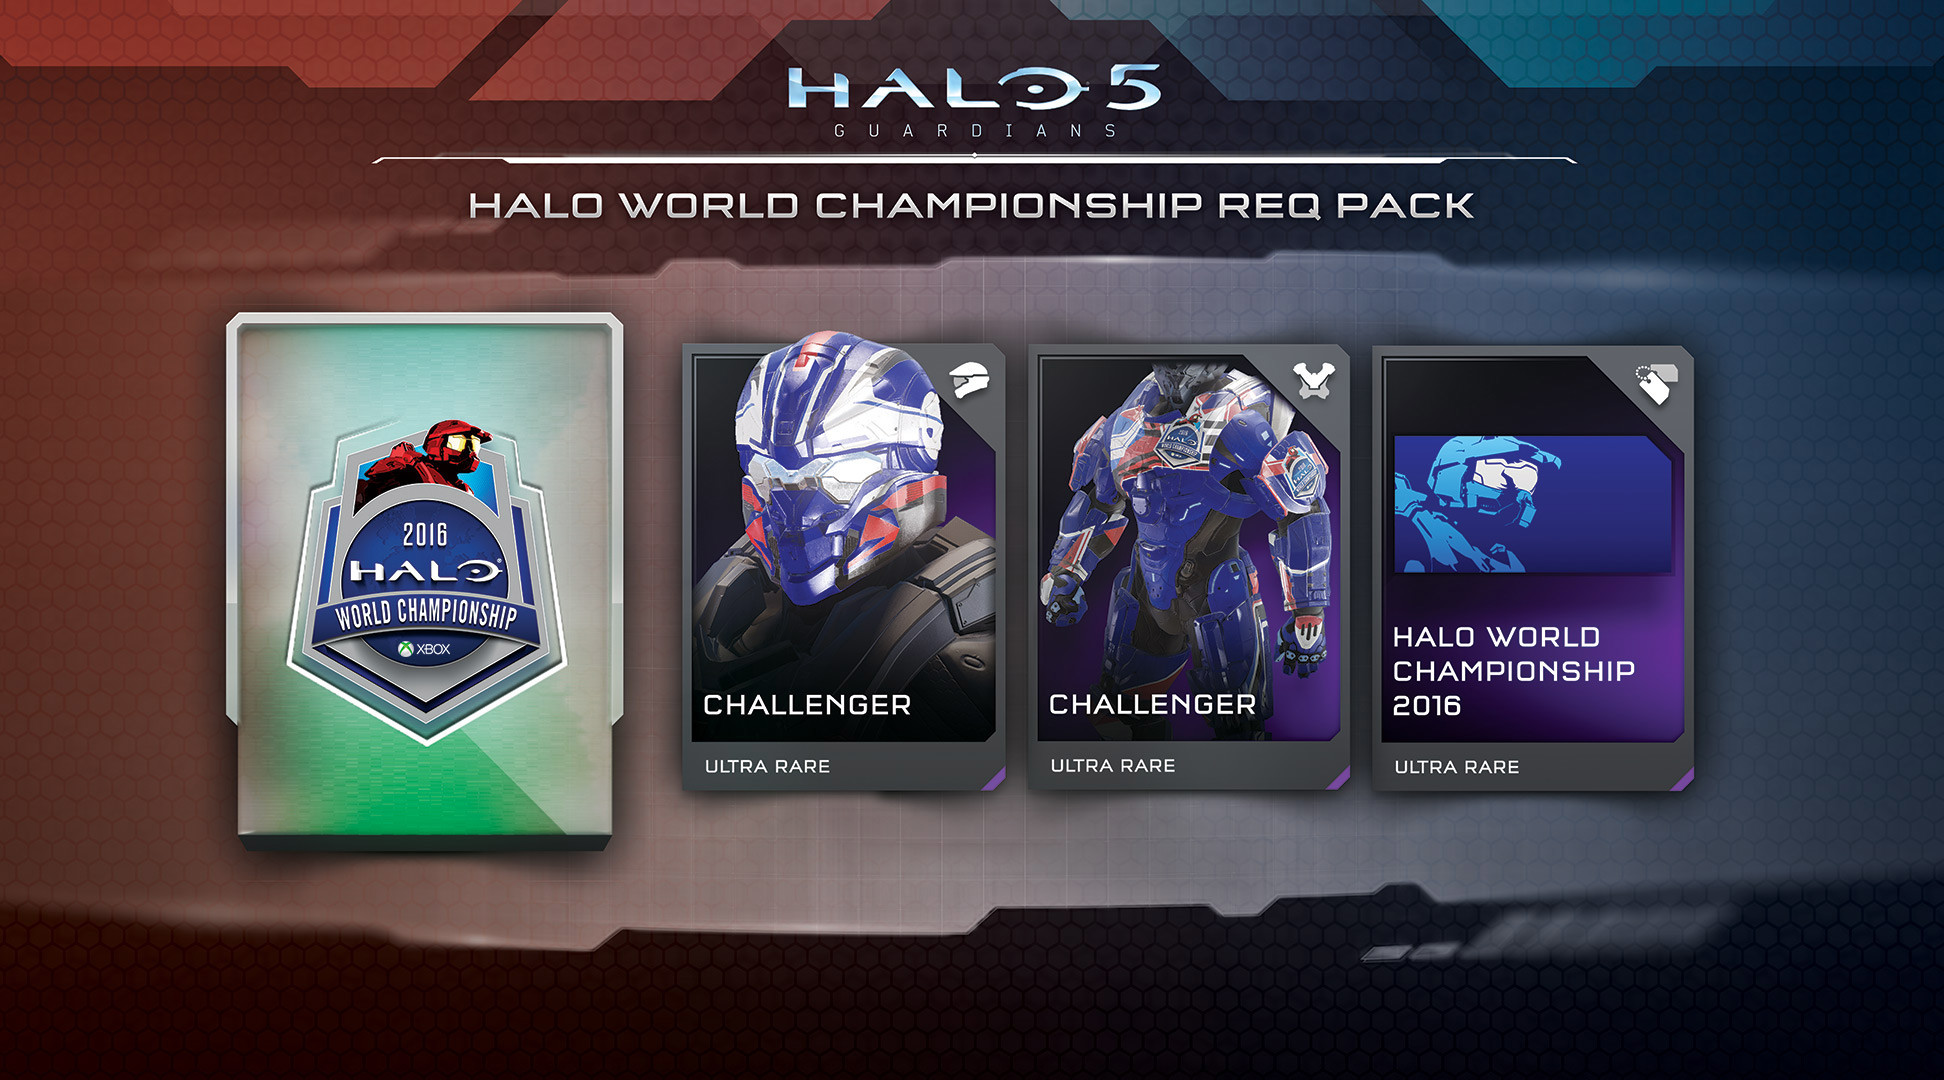 1944x1080 These were previously available in December 2015 via the Halo Championship  Series premium REQ pack which cost $10 or 80,000 REQ points.